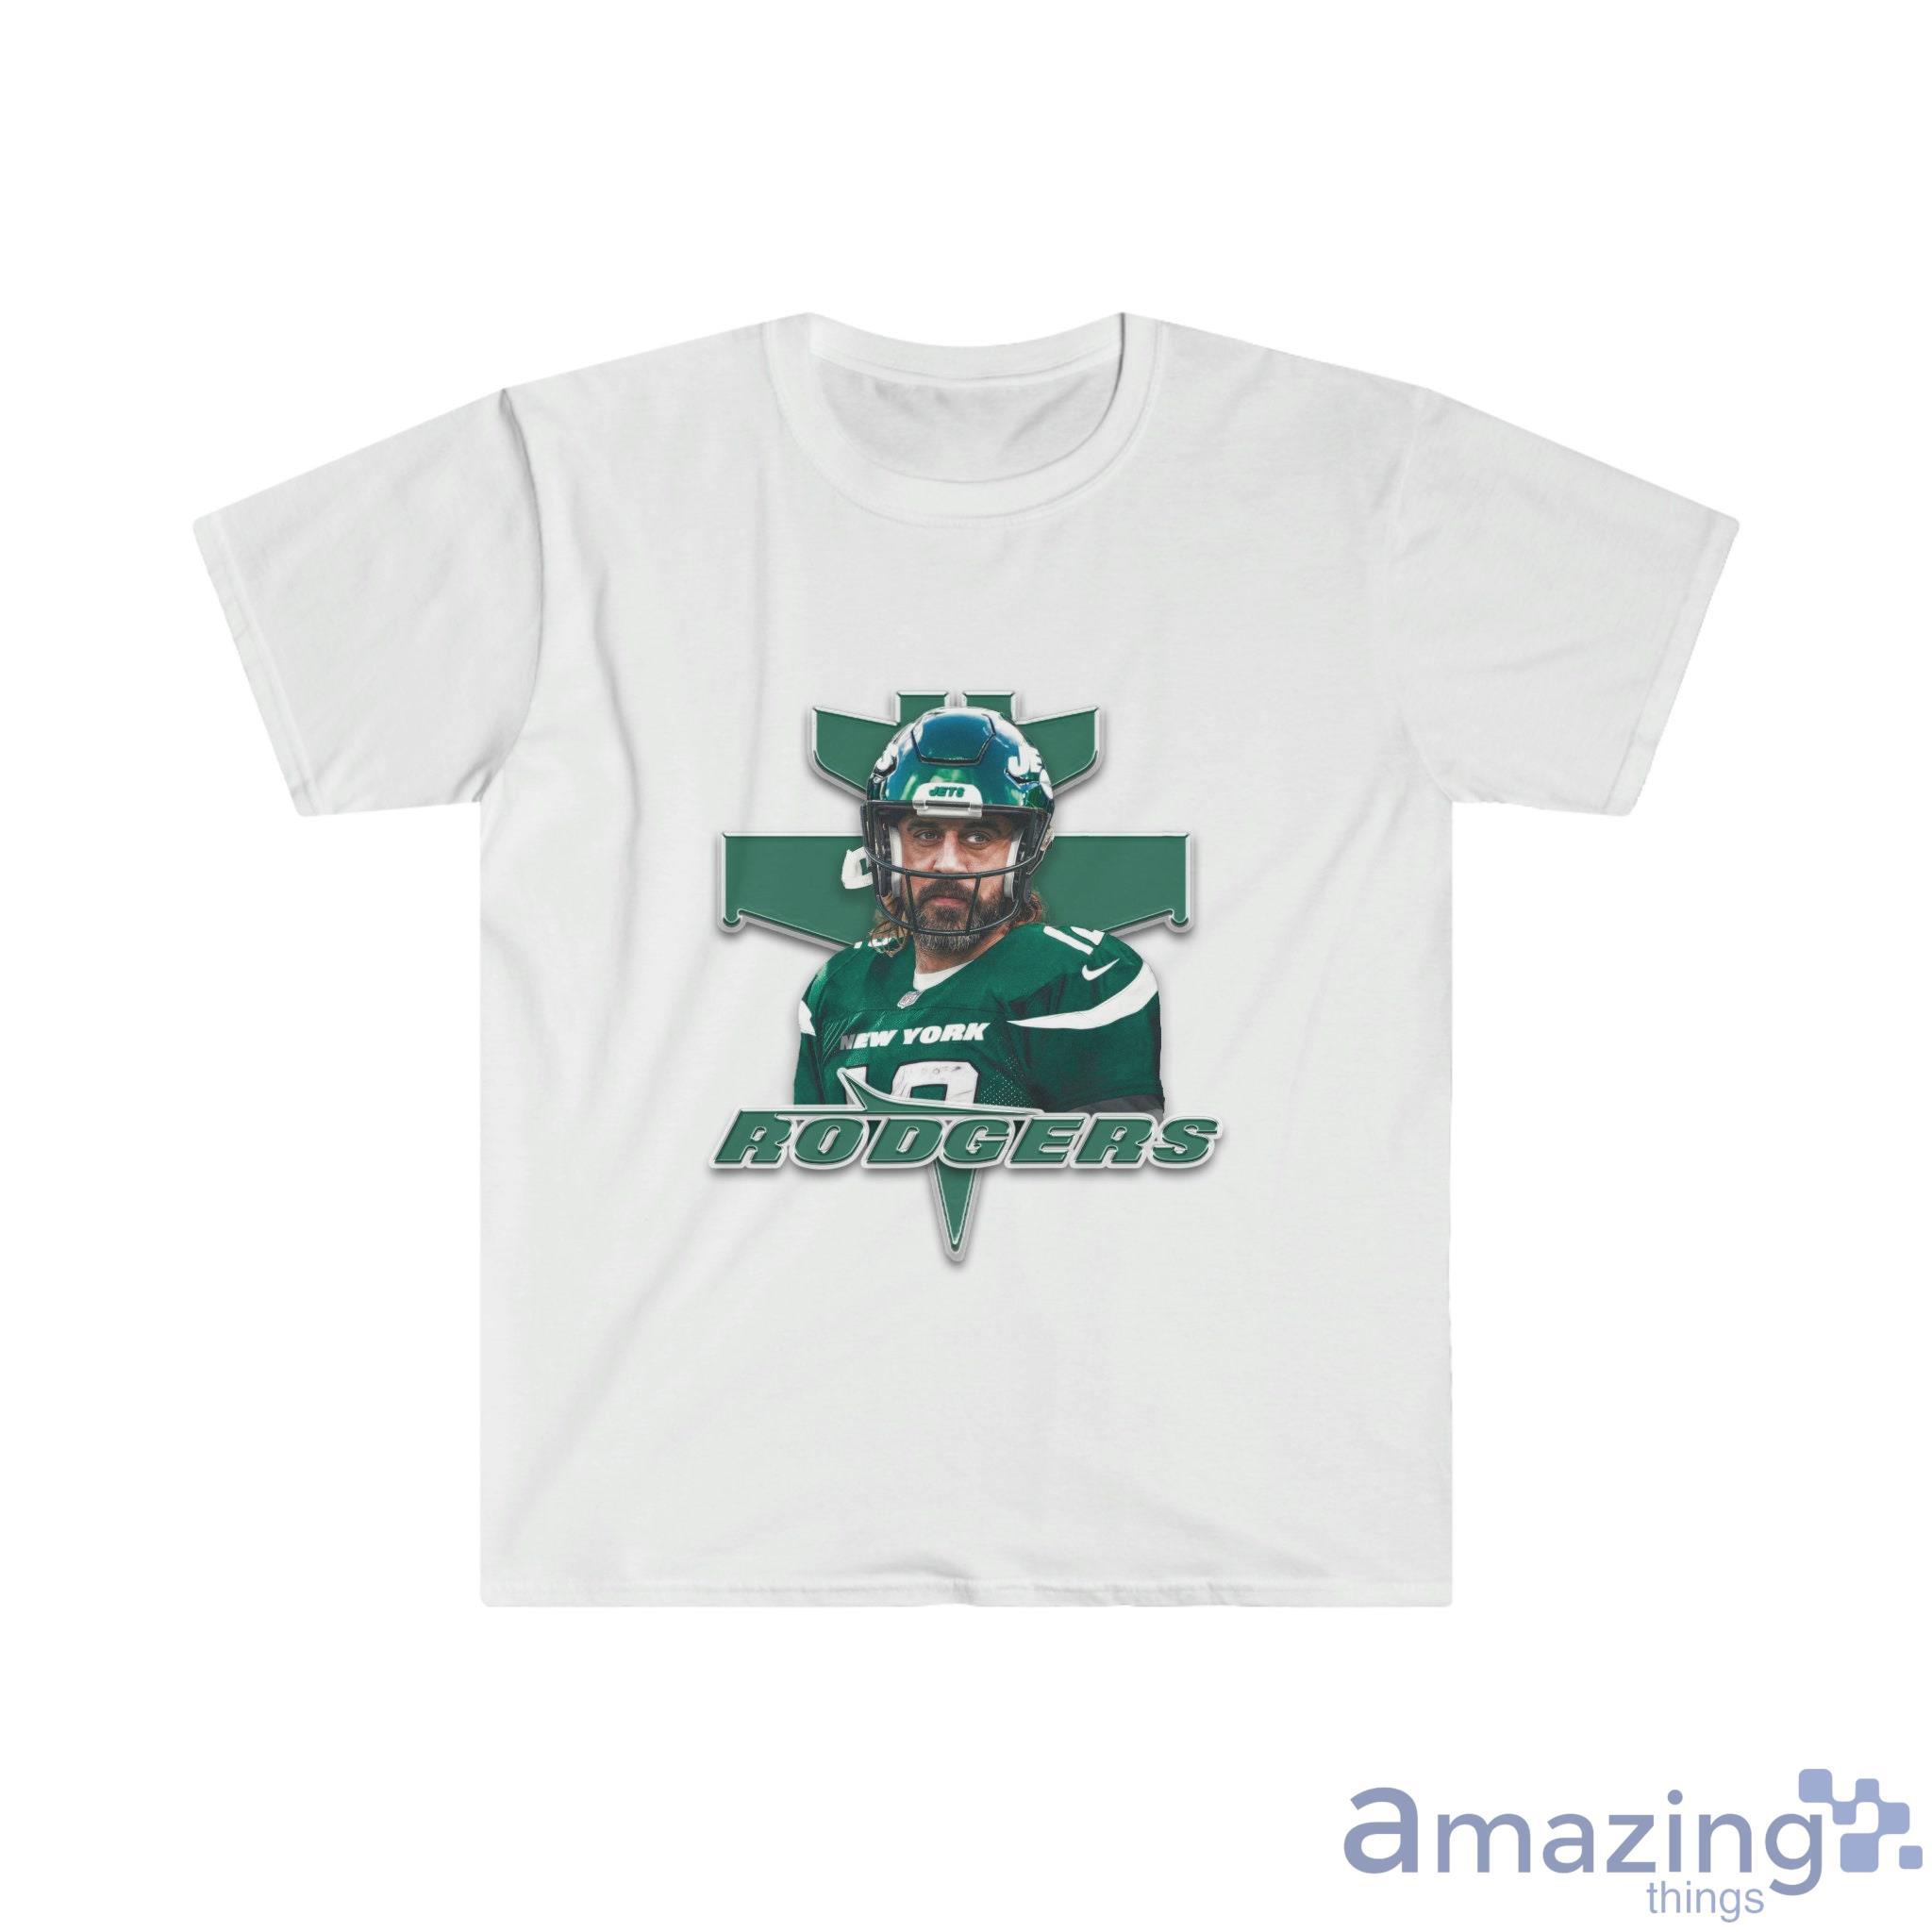 Aaron Rodgers New York Jets Graphic T-shirt - Aaron Rodgers New York Jets Graphic T-shirt